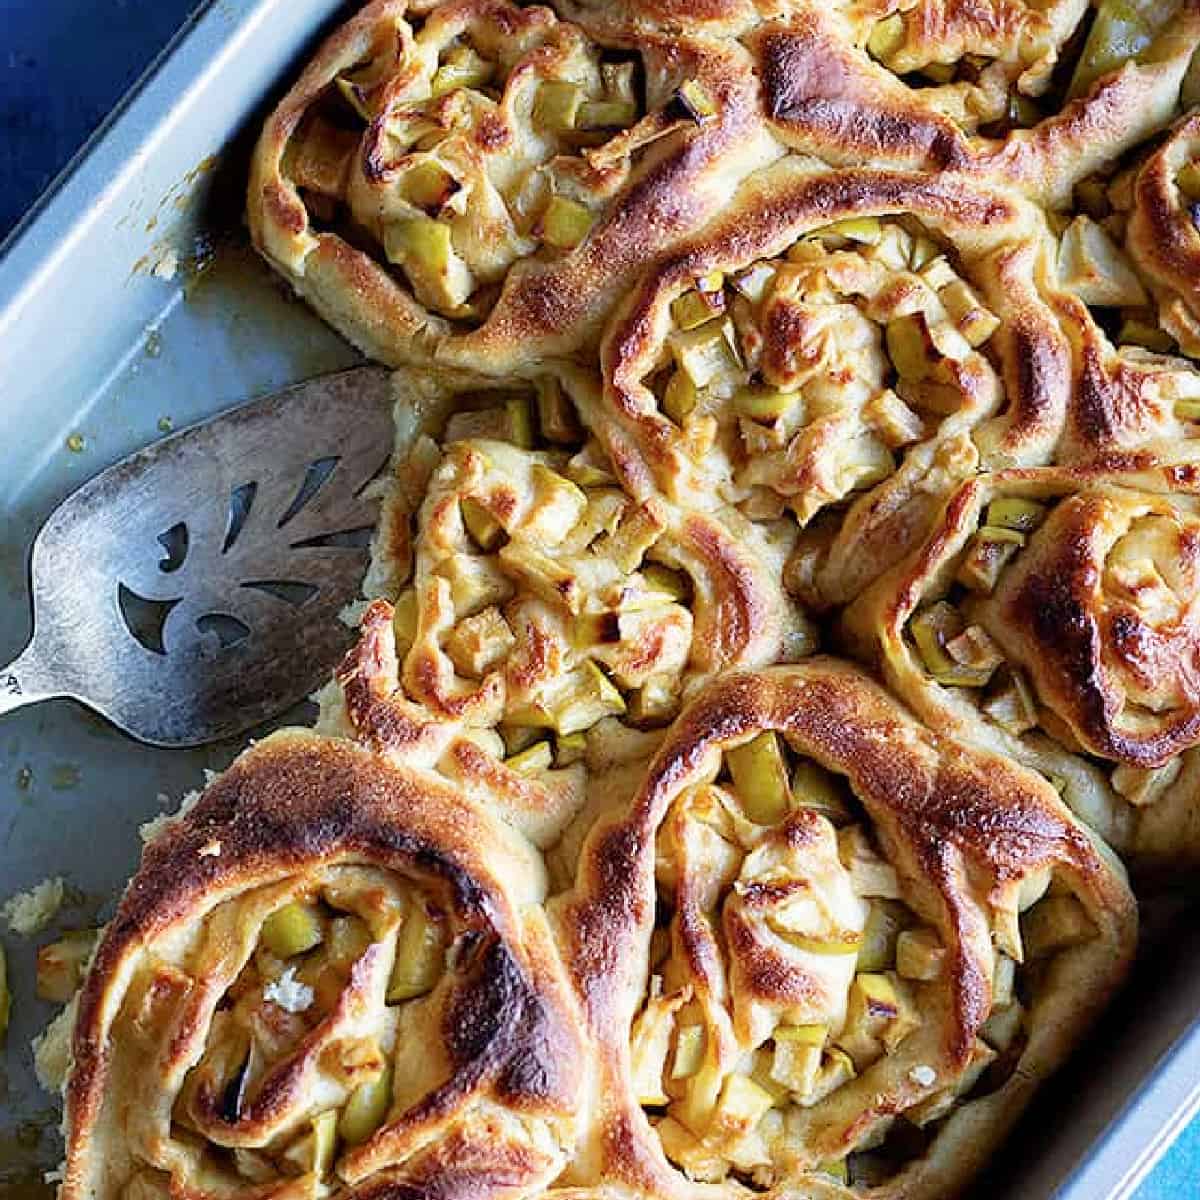 Soft and fluffy apple cinnamon rolls made from scratch. These cinnamon rolls have delicious apples in every bite and they’re great for snacking.
